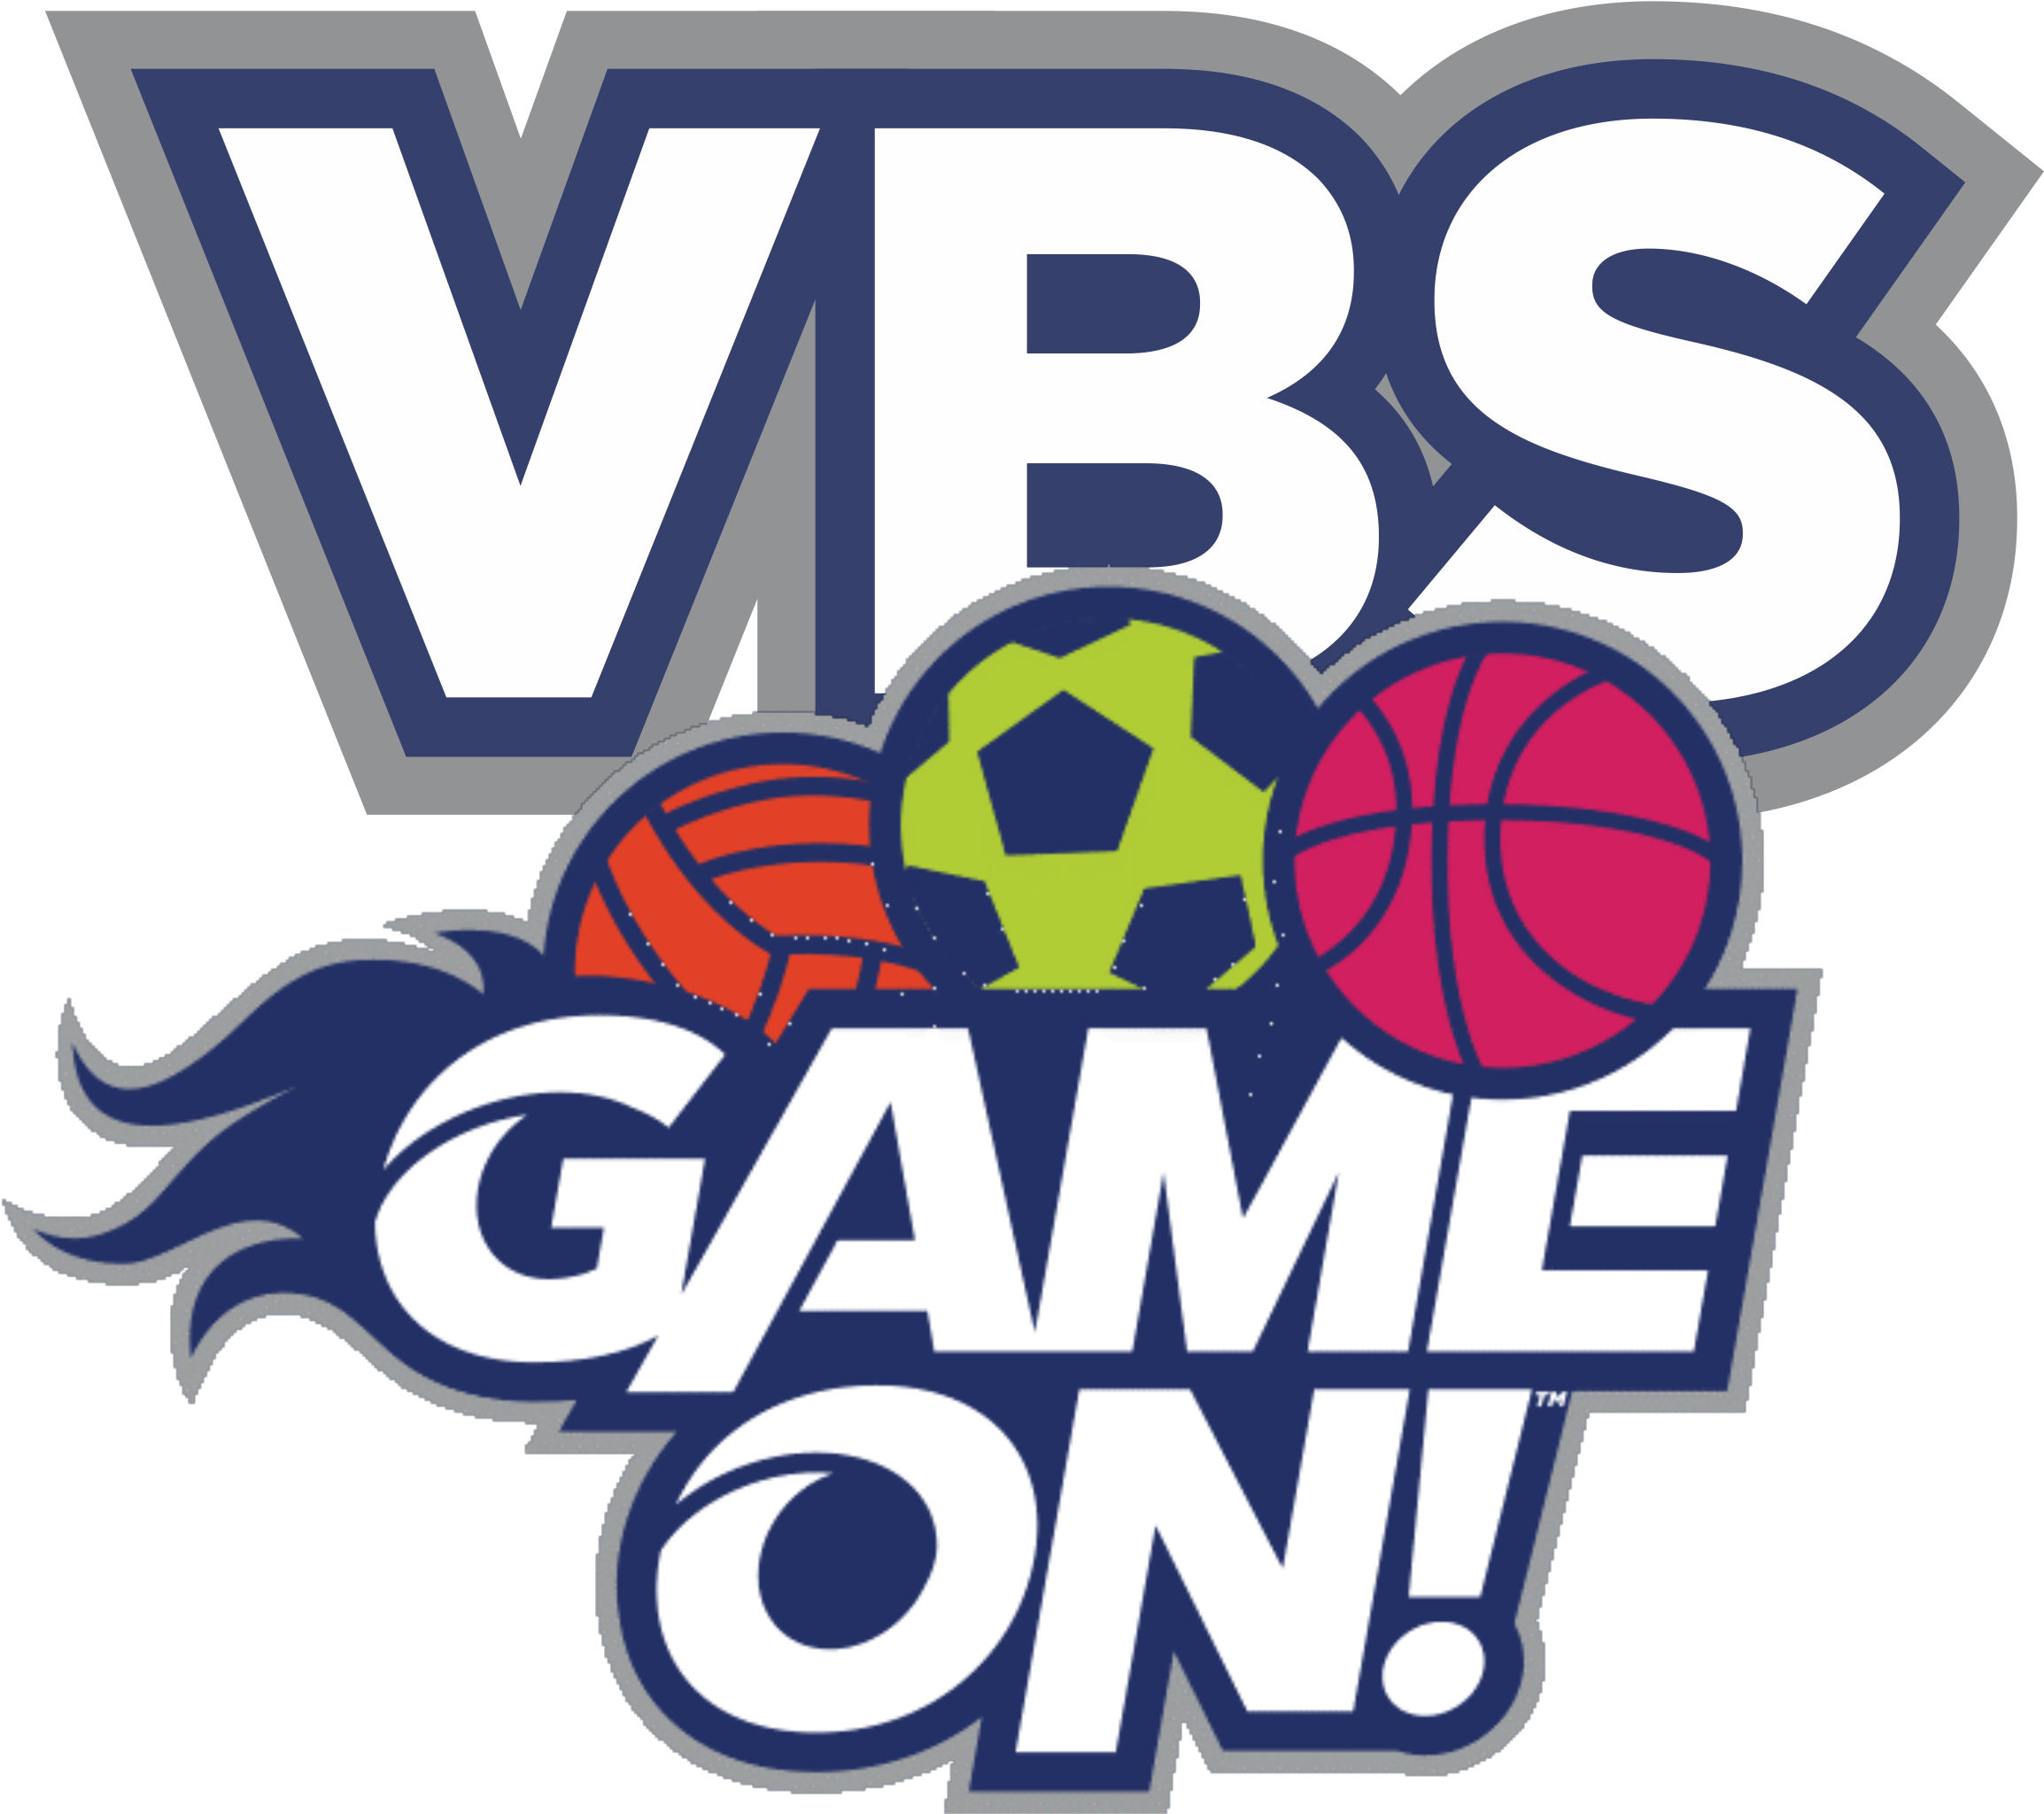 Vbs 2018 First Baptist Church Ludowici - Game On Vbs 2018 (2335x2047)